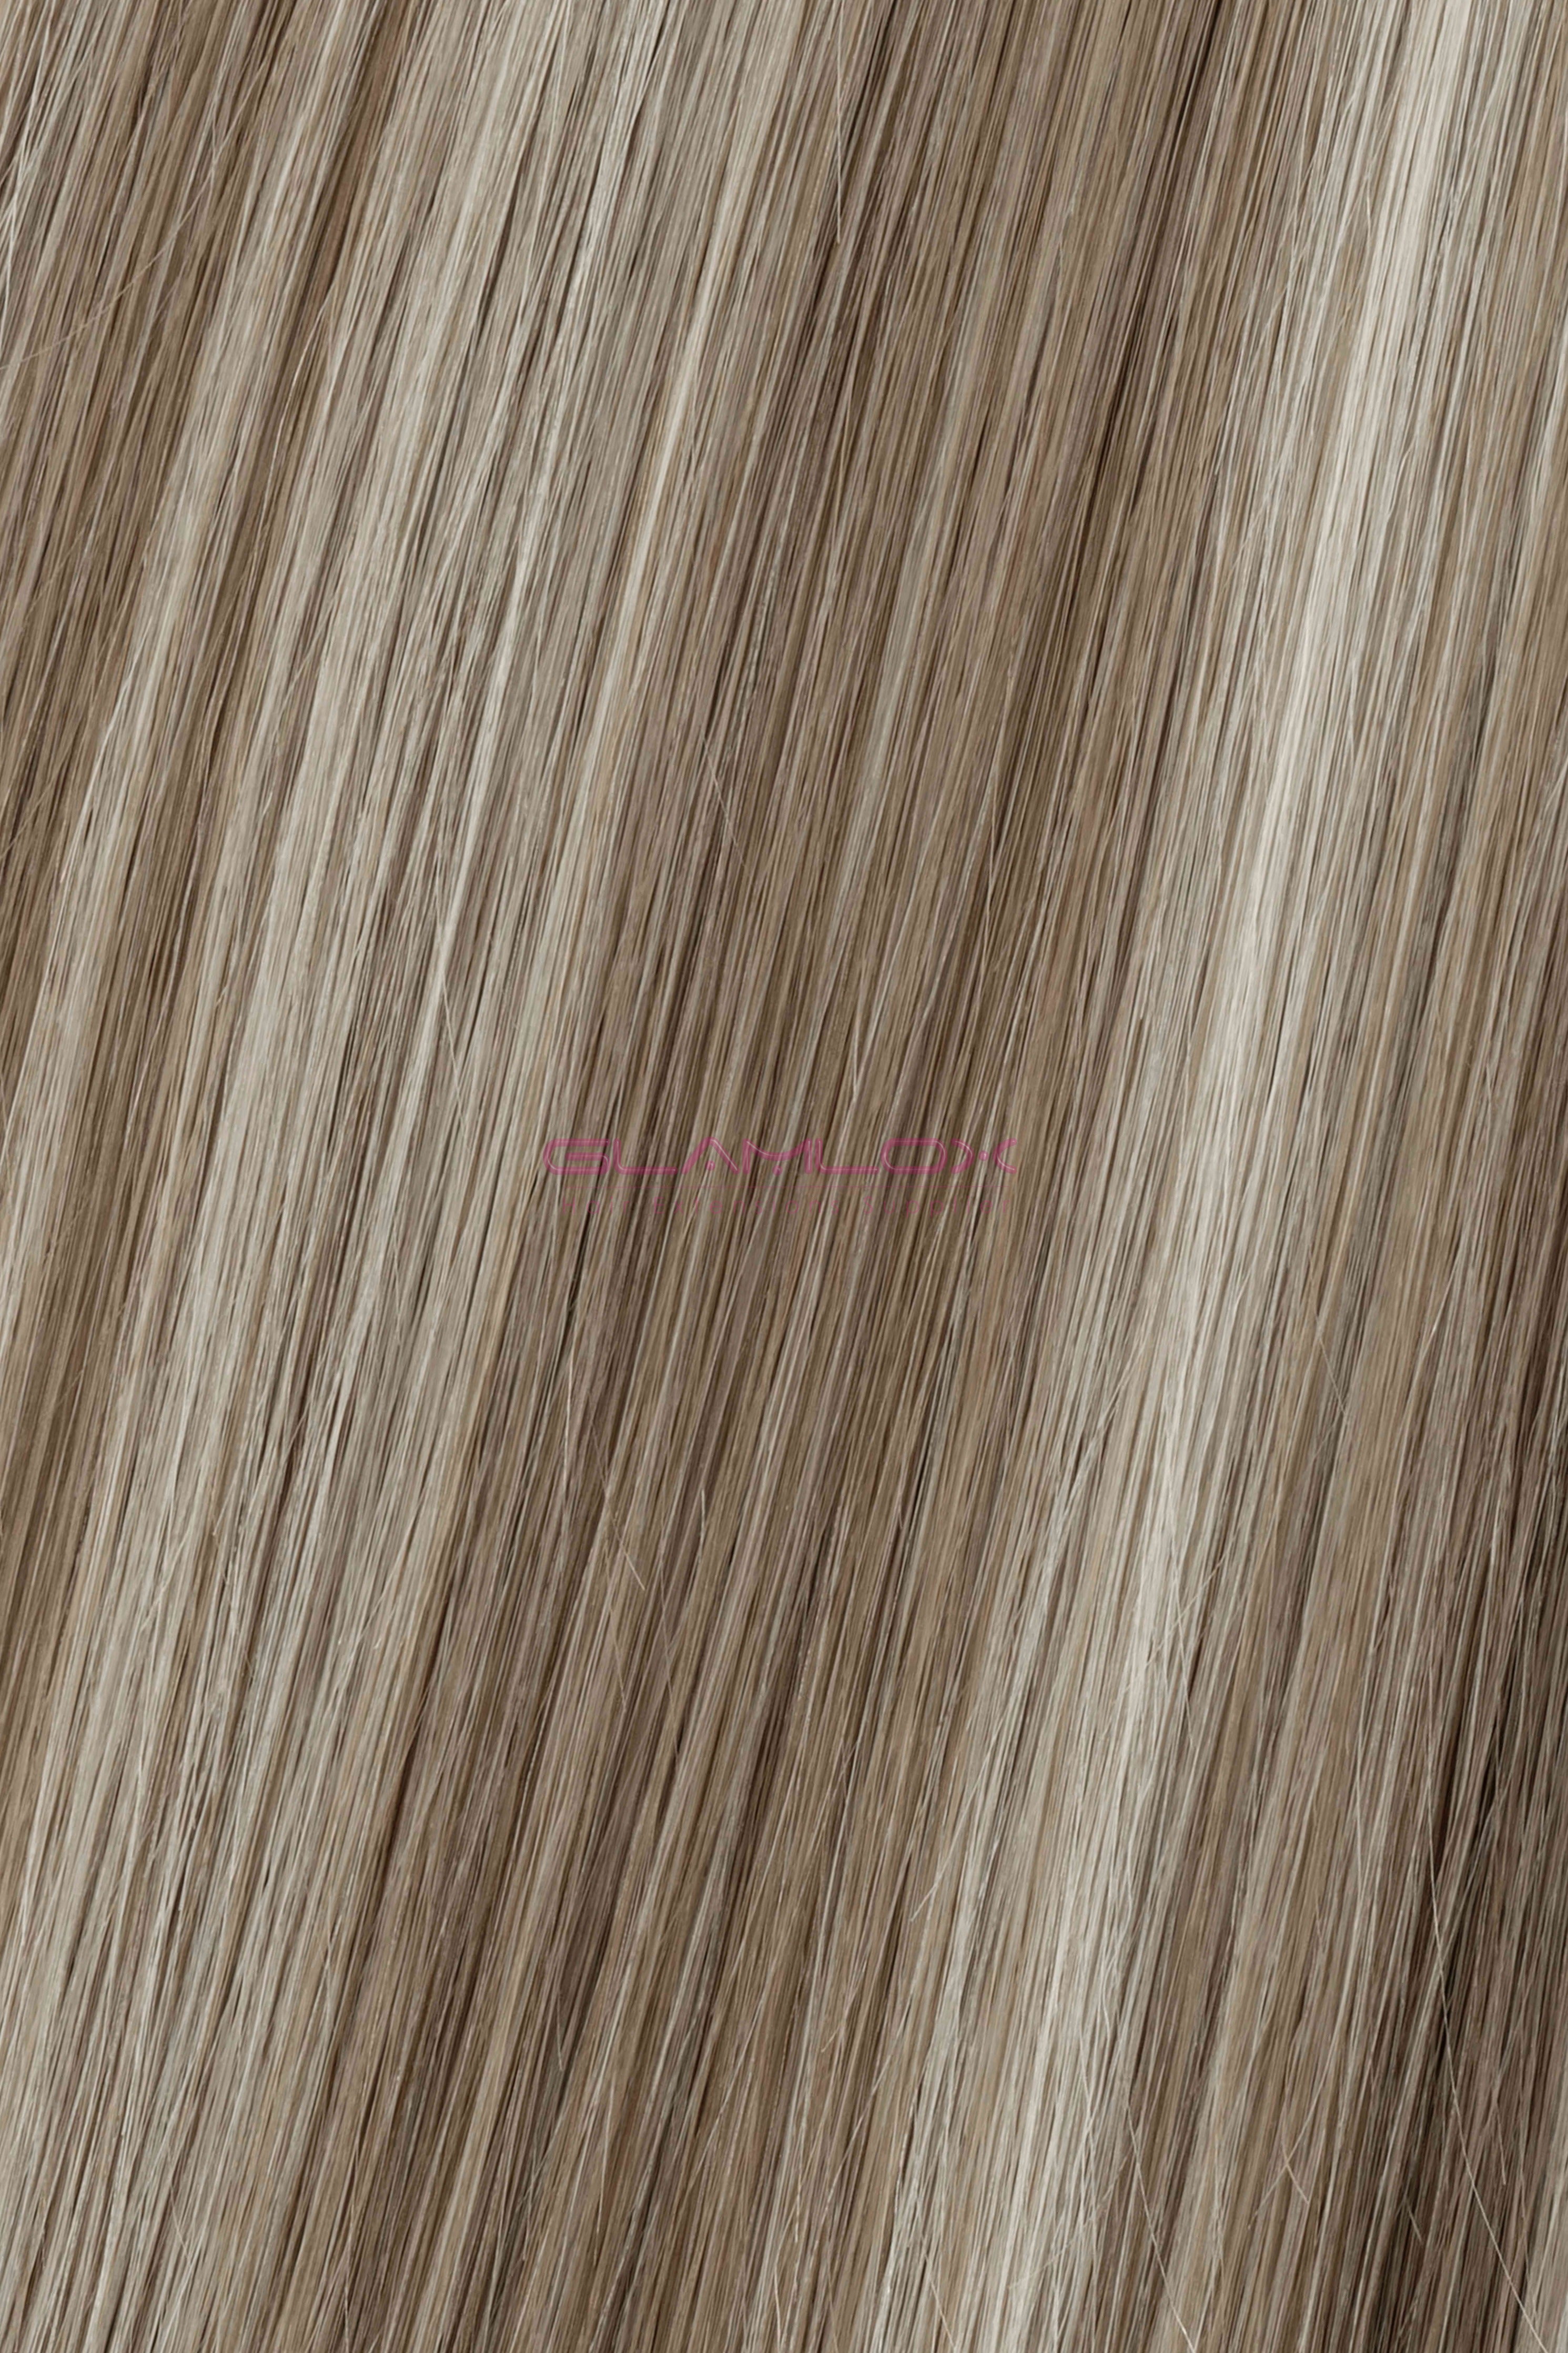 26" Nano Ring Hair Extensions - Russian Mongolian Double Drawn Remy Human Hair - 100 Strands